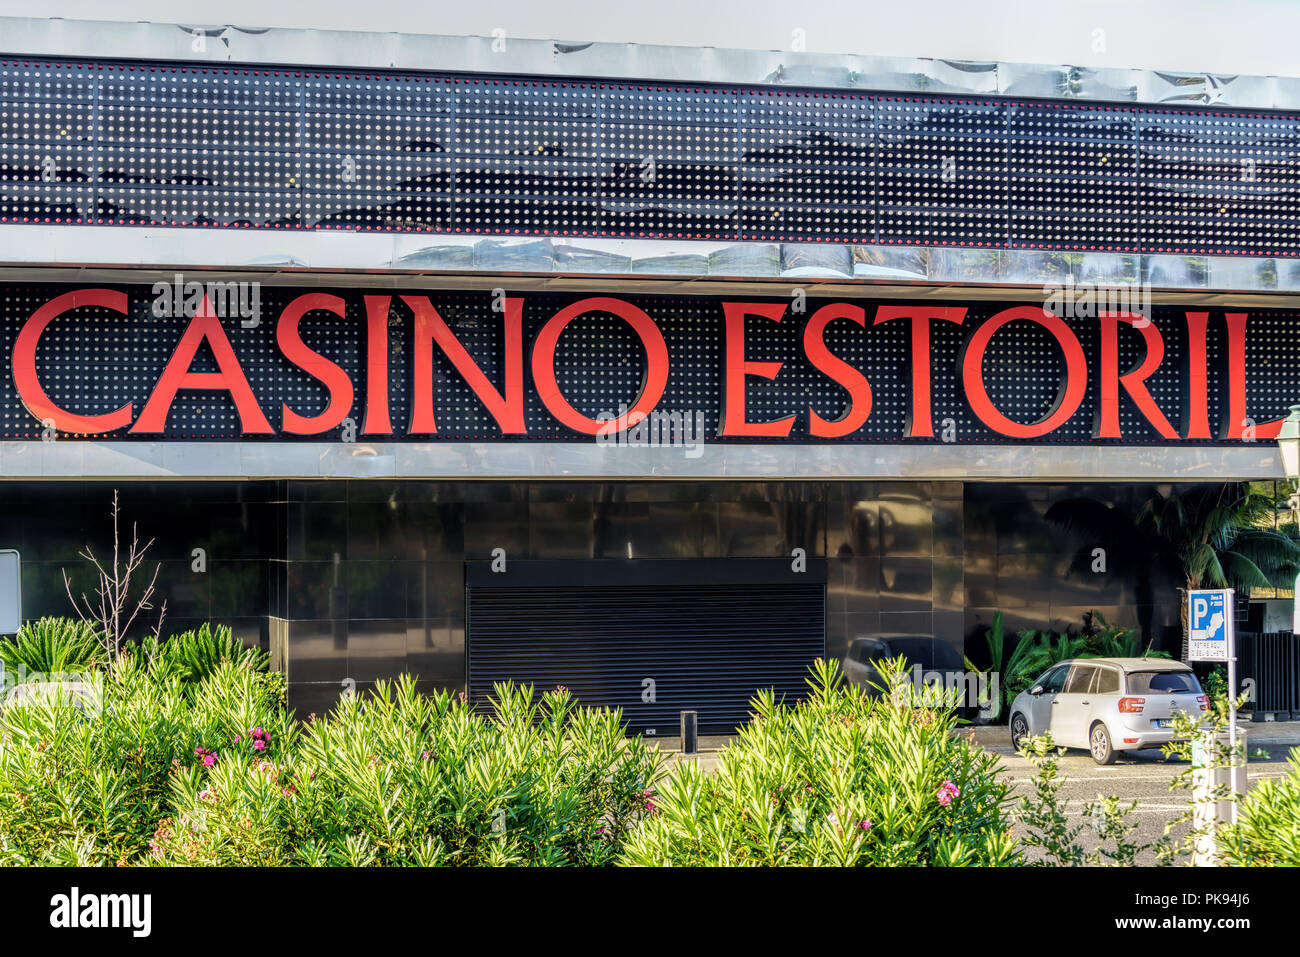 Facade of the Casino Estoril in Estoril city, just outside of Lisbon. One of the largest casinos in Europe Stock Photo